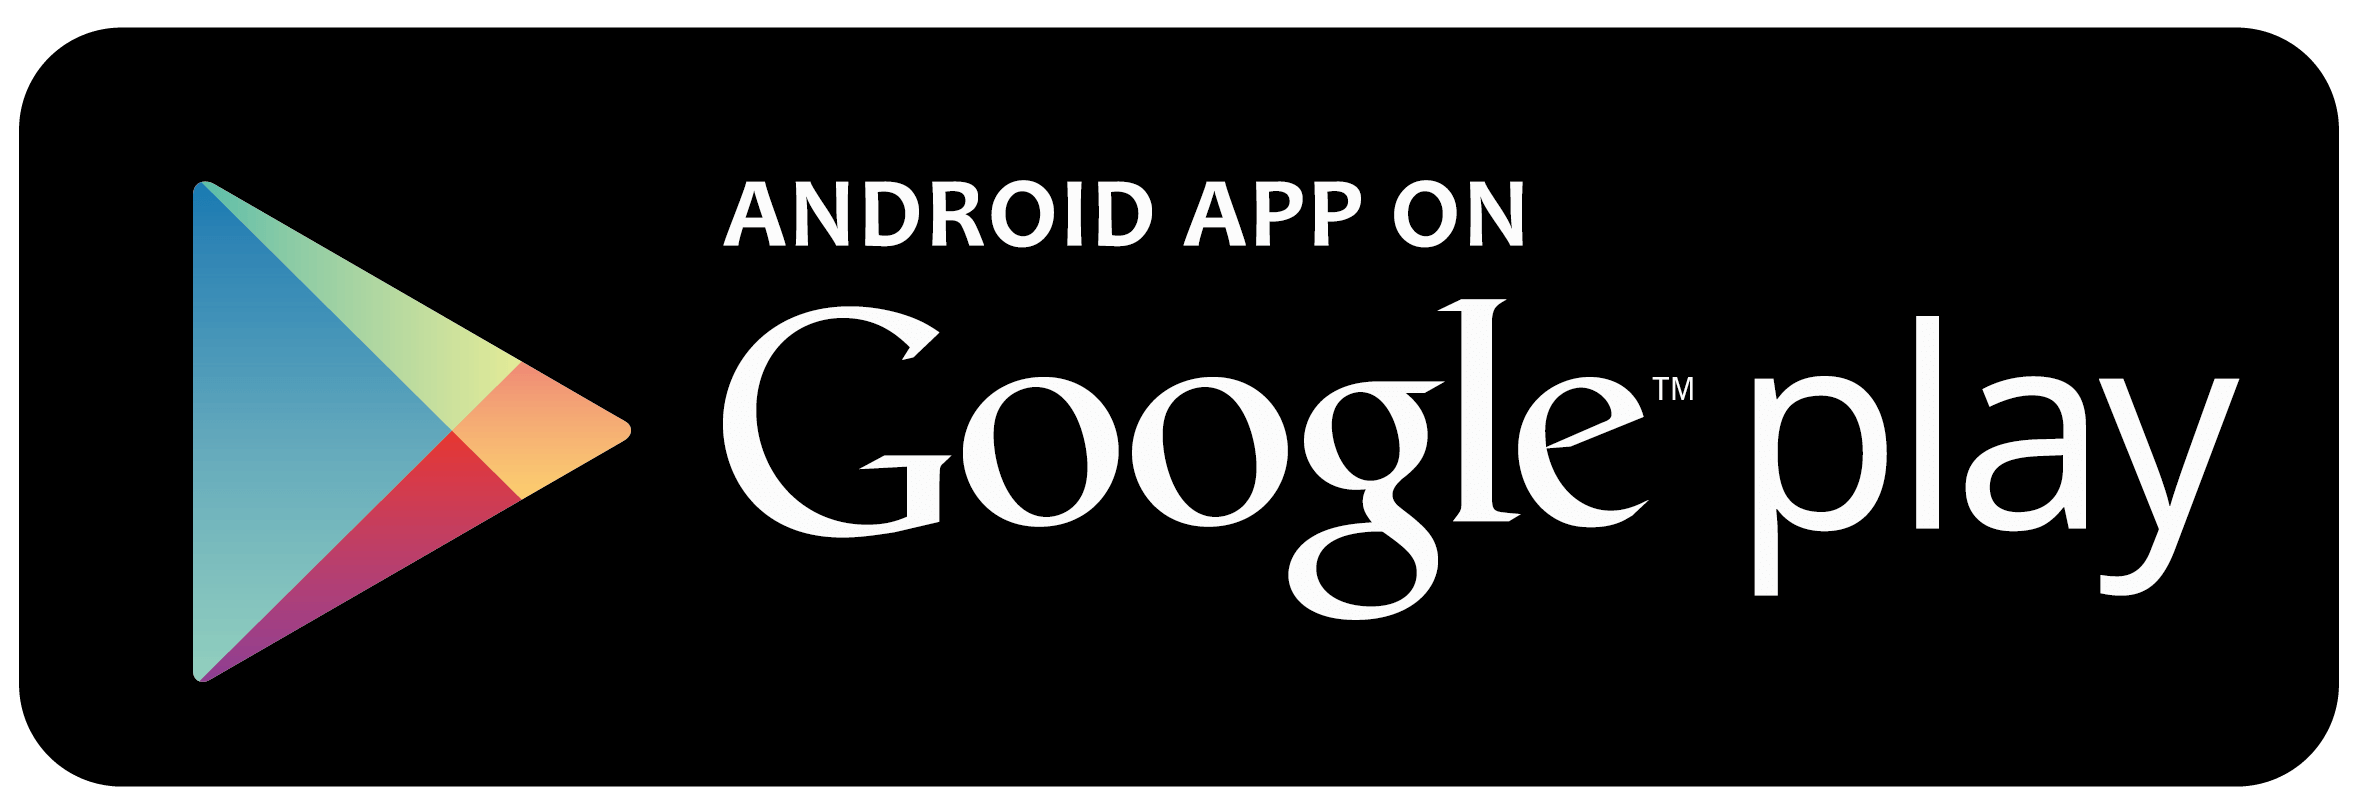 On Google Play App Andproid Logo - National MI's Mobile Apps